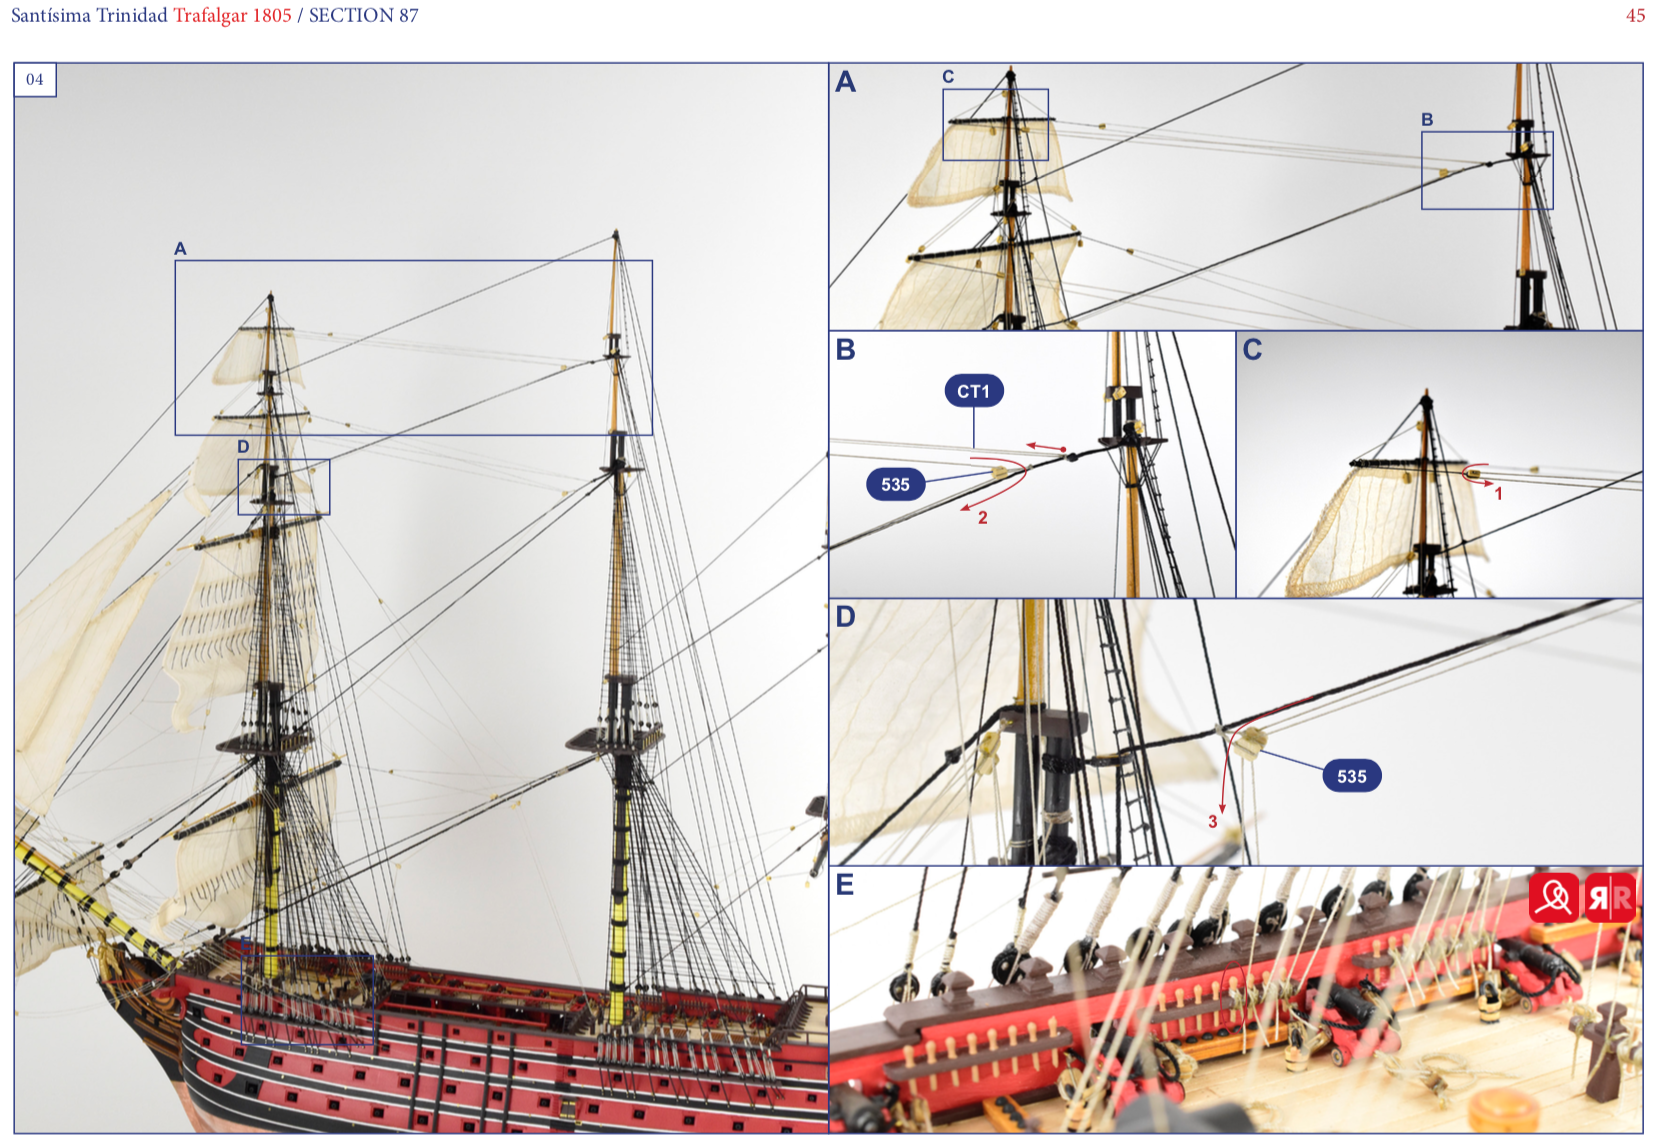 Assembly Instructions for Wooden Naval Modeling Kit Spanish Ship of the Line Santisima Trinidad (22901) by Artesanía Latina.